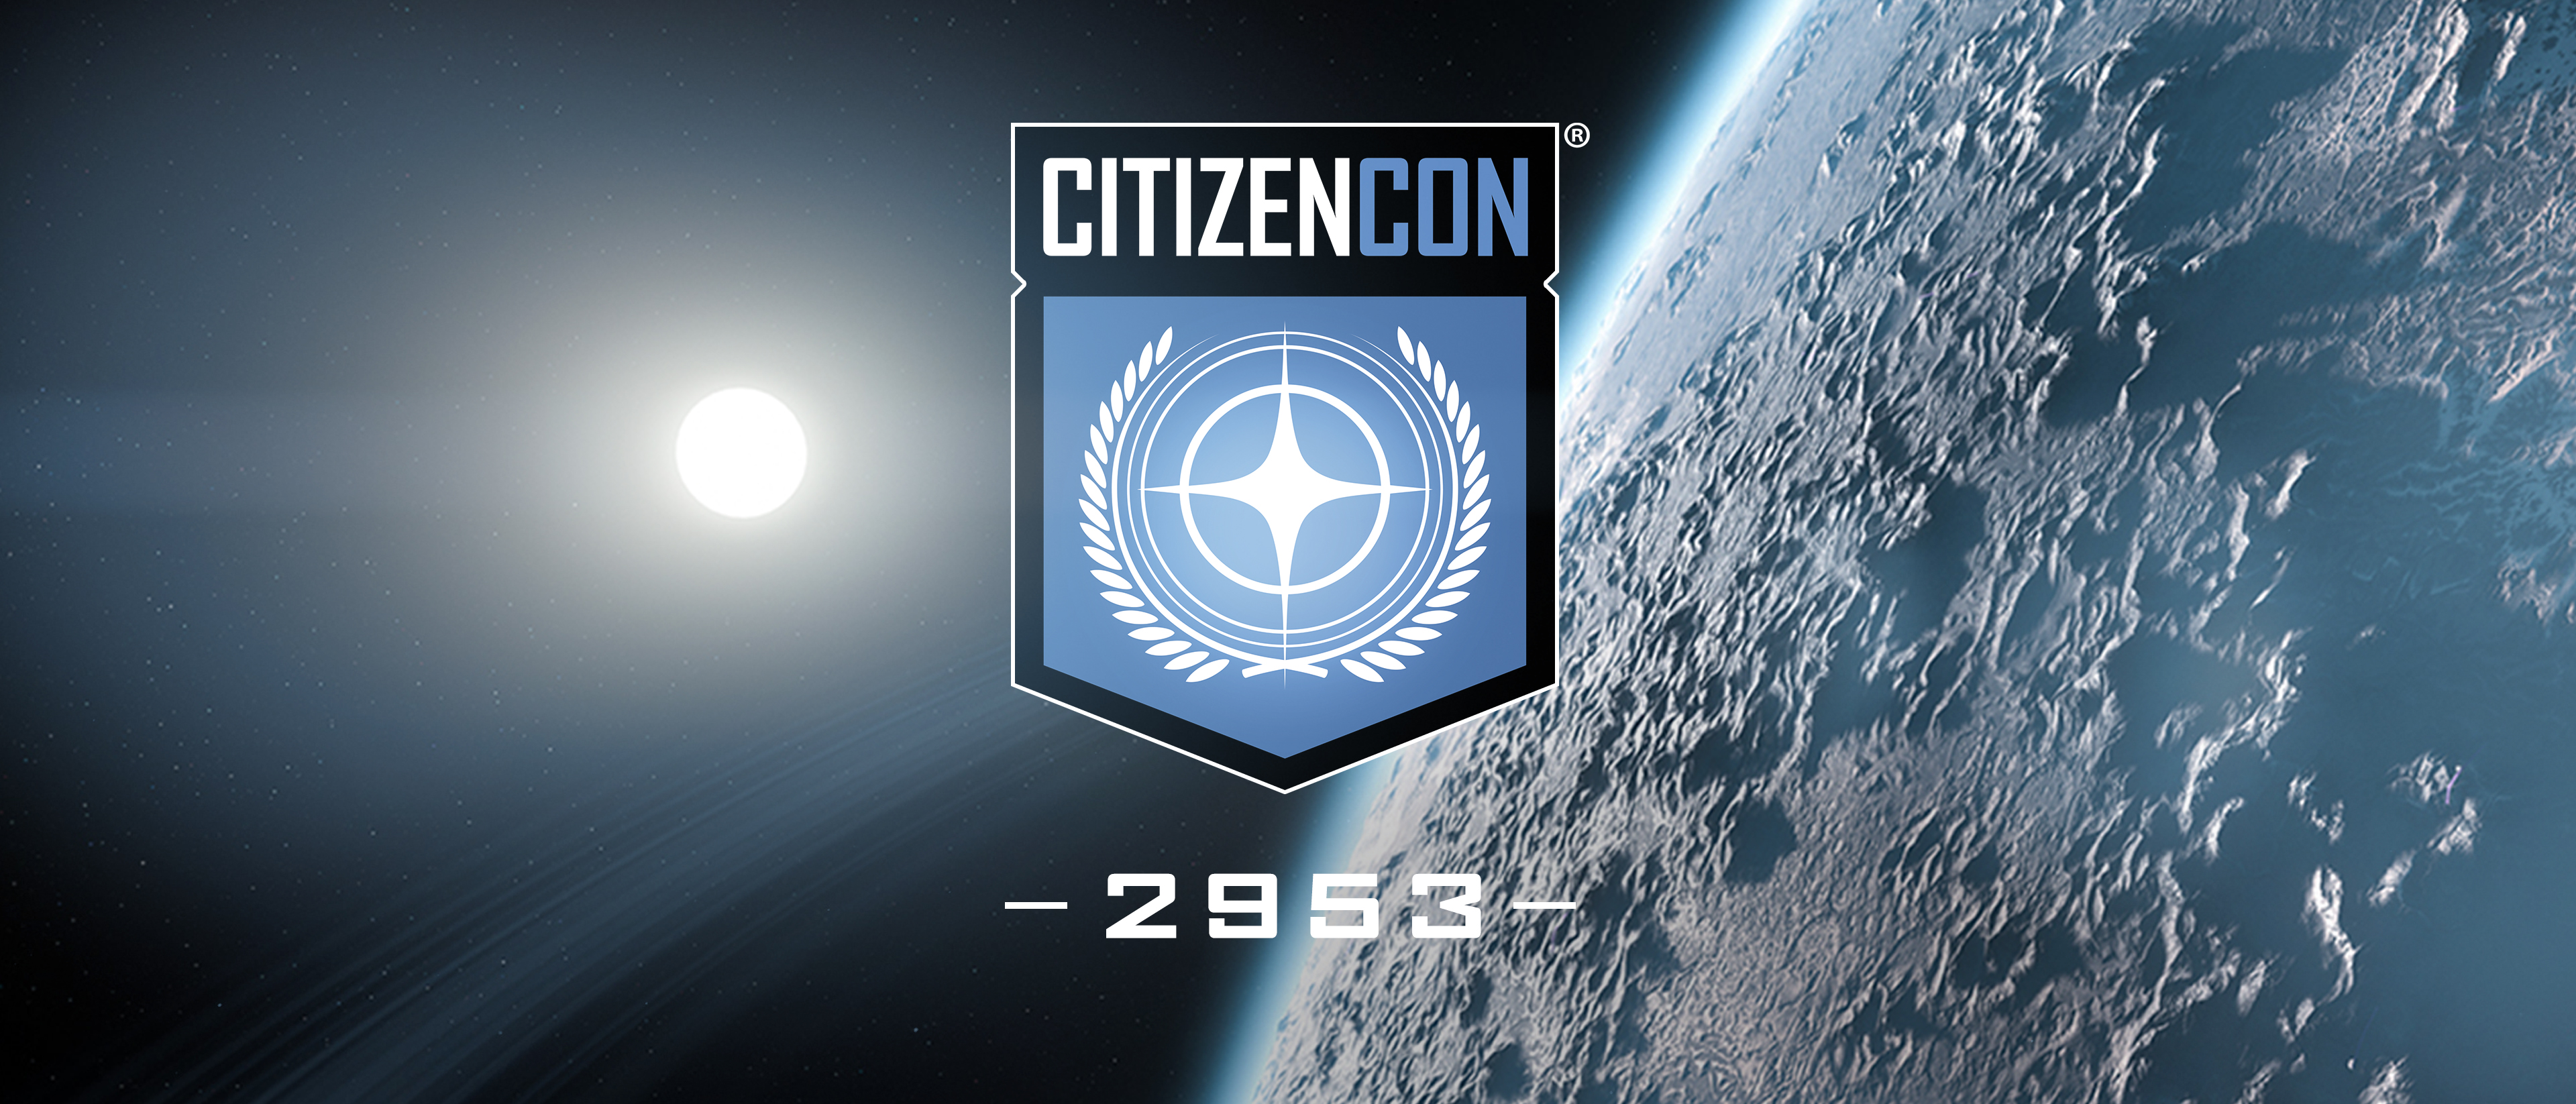 Star Citizen on X: Watching #CitizenCon2953 from home? Our livestream will  start at 10 a.m. Pacific on our official Twitch channel. We're also pleased  to inform you we've taken the necessary steps